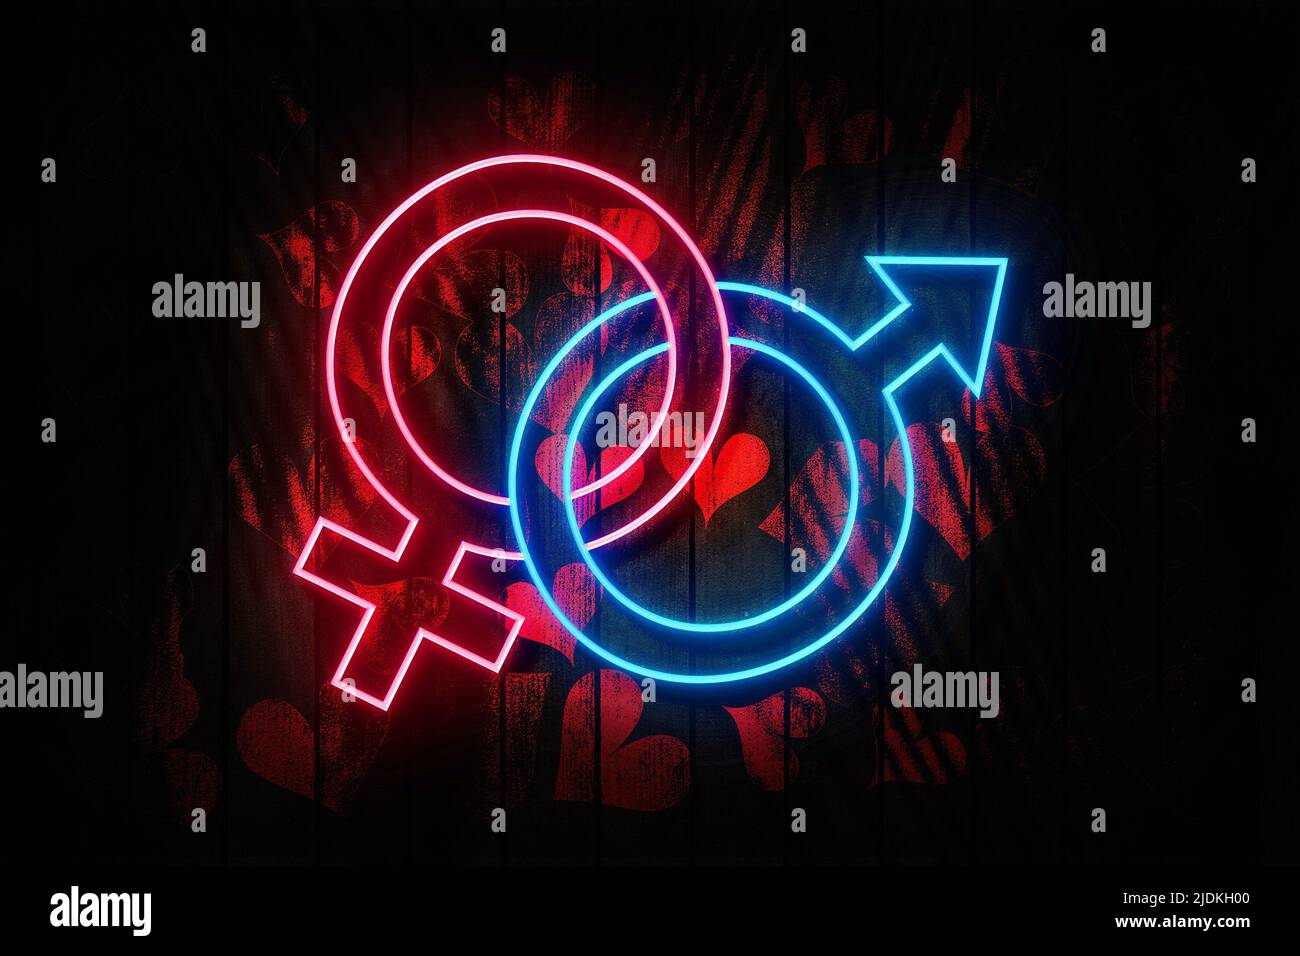 Venus and Mars Pink and Blue Gender symbol Neon Sign on a Dark Heart decorated Wooden Wall  3D illustration. Stock Photo